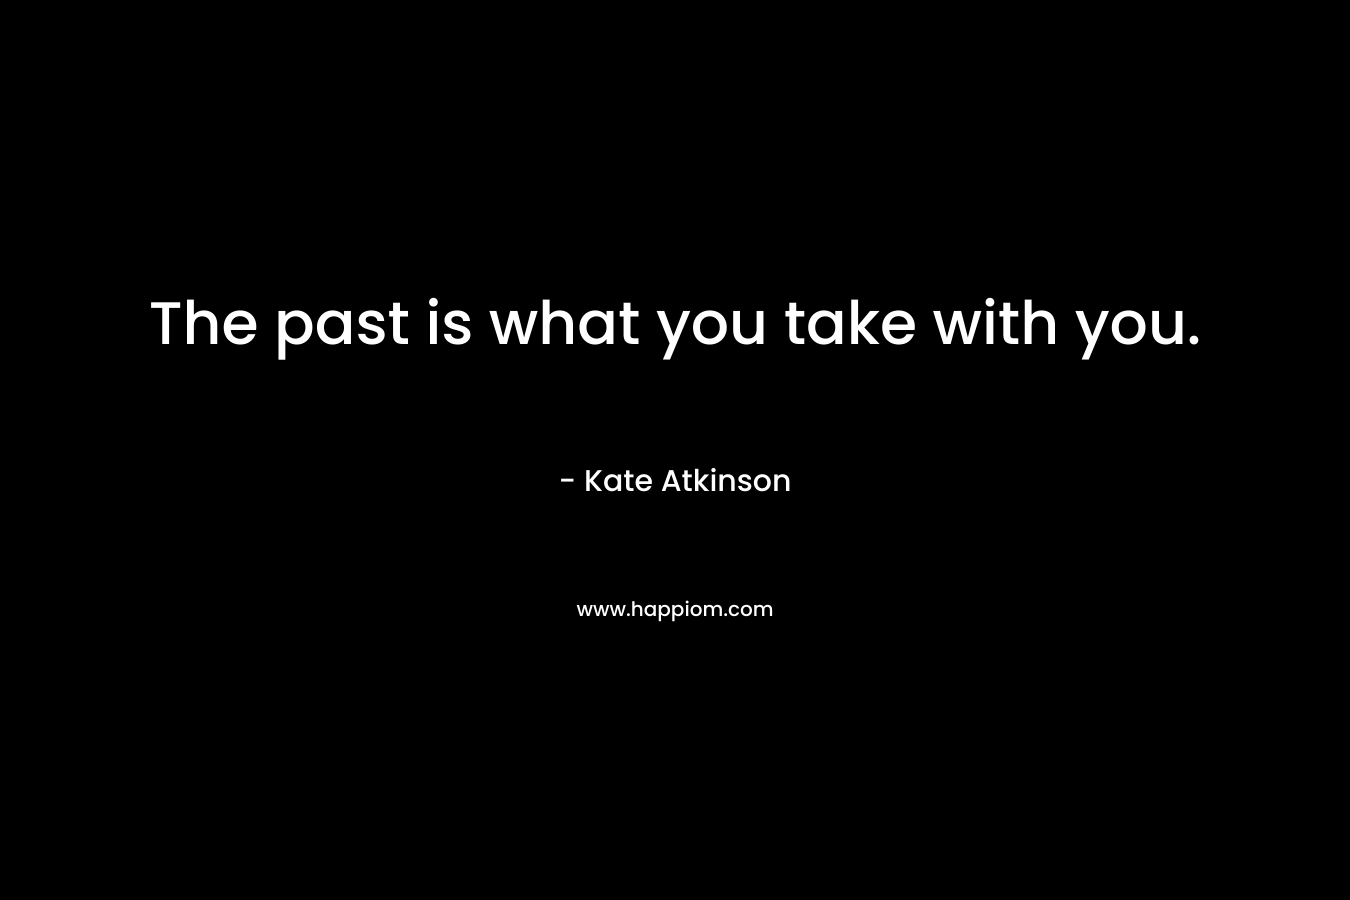 The past is what you take with you. – Kate Atkinson